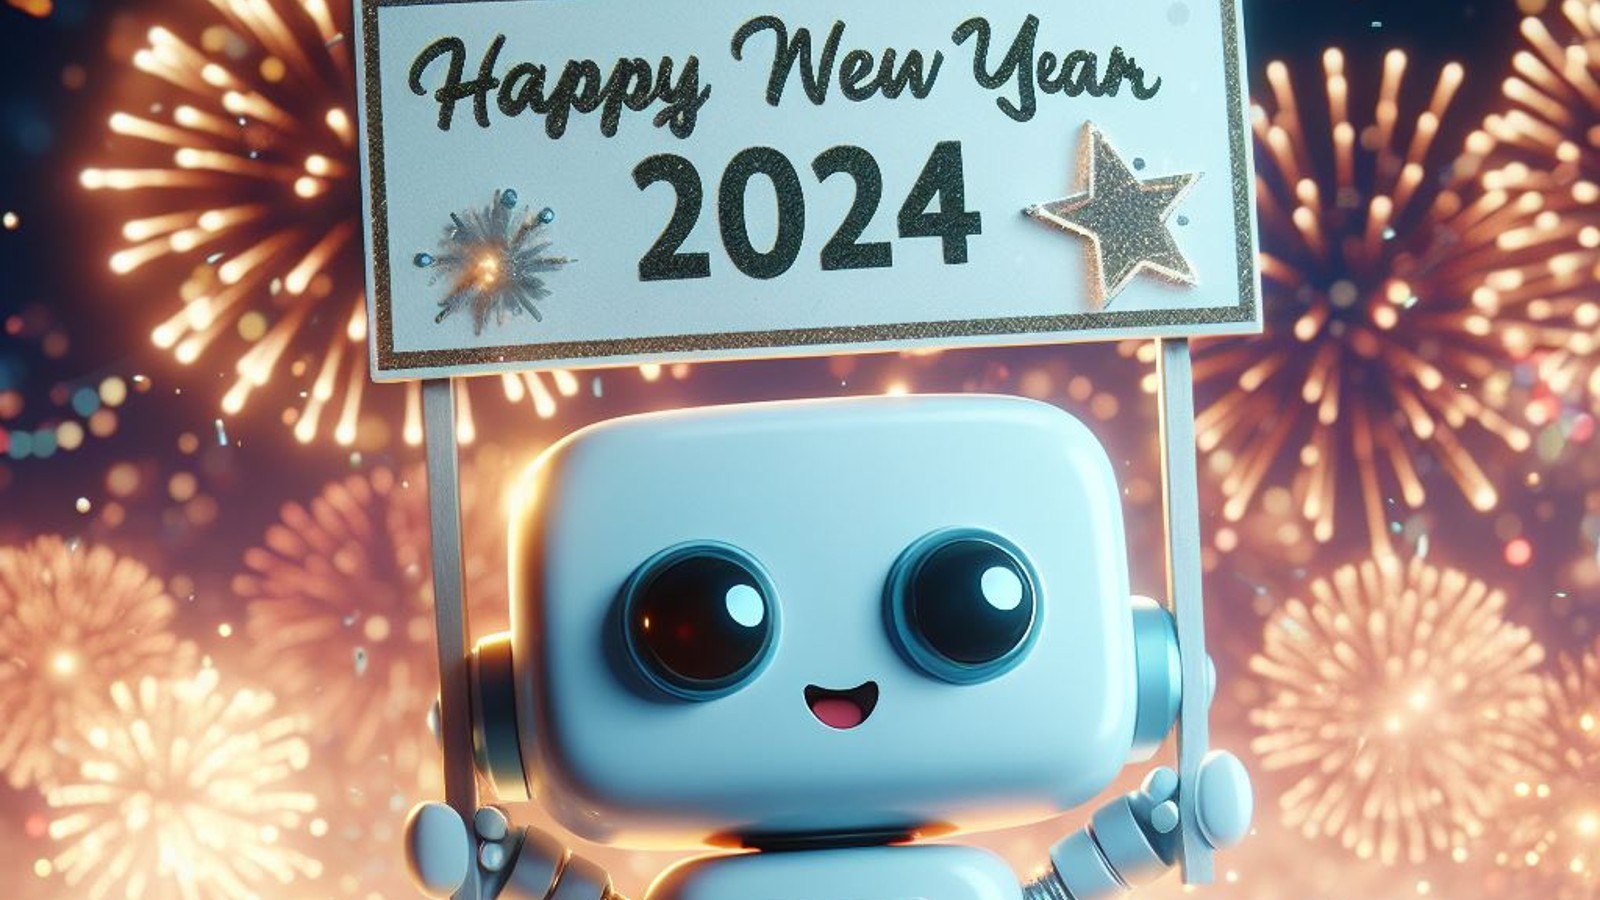 From Bard to ChatGPT: Creative new year 2024 wishes by AI chatbots. Technology News Indian Express